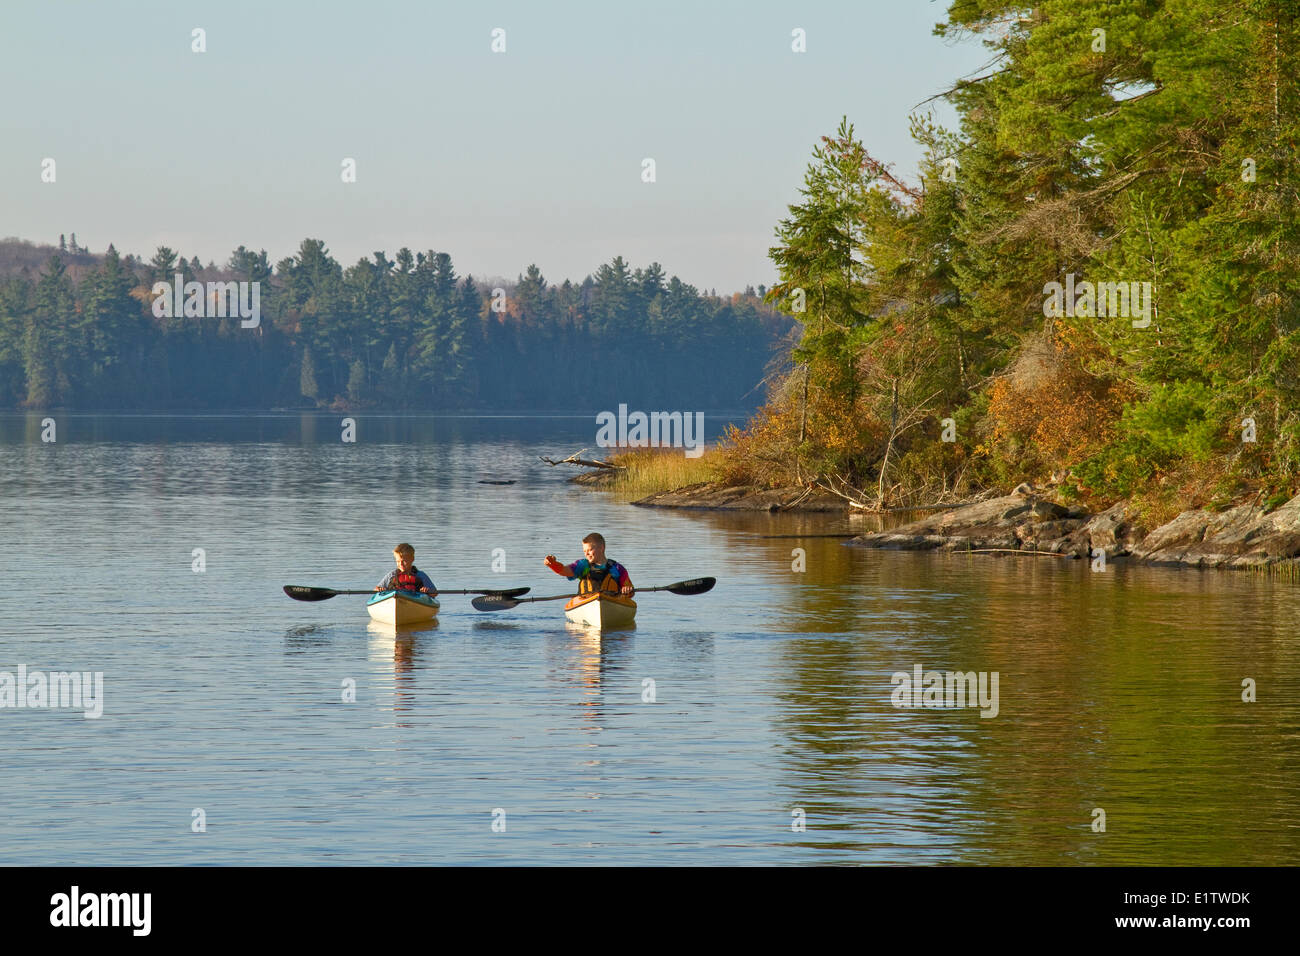 Two young boys enjoy early morning paddle in kayaks on Source Lake, Algonquin Park, Ontario, Canada. Stock Photo